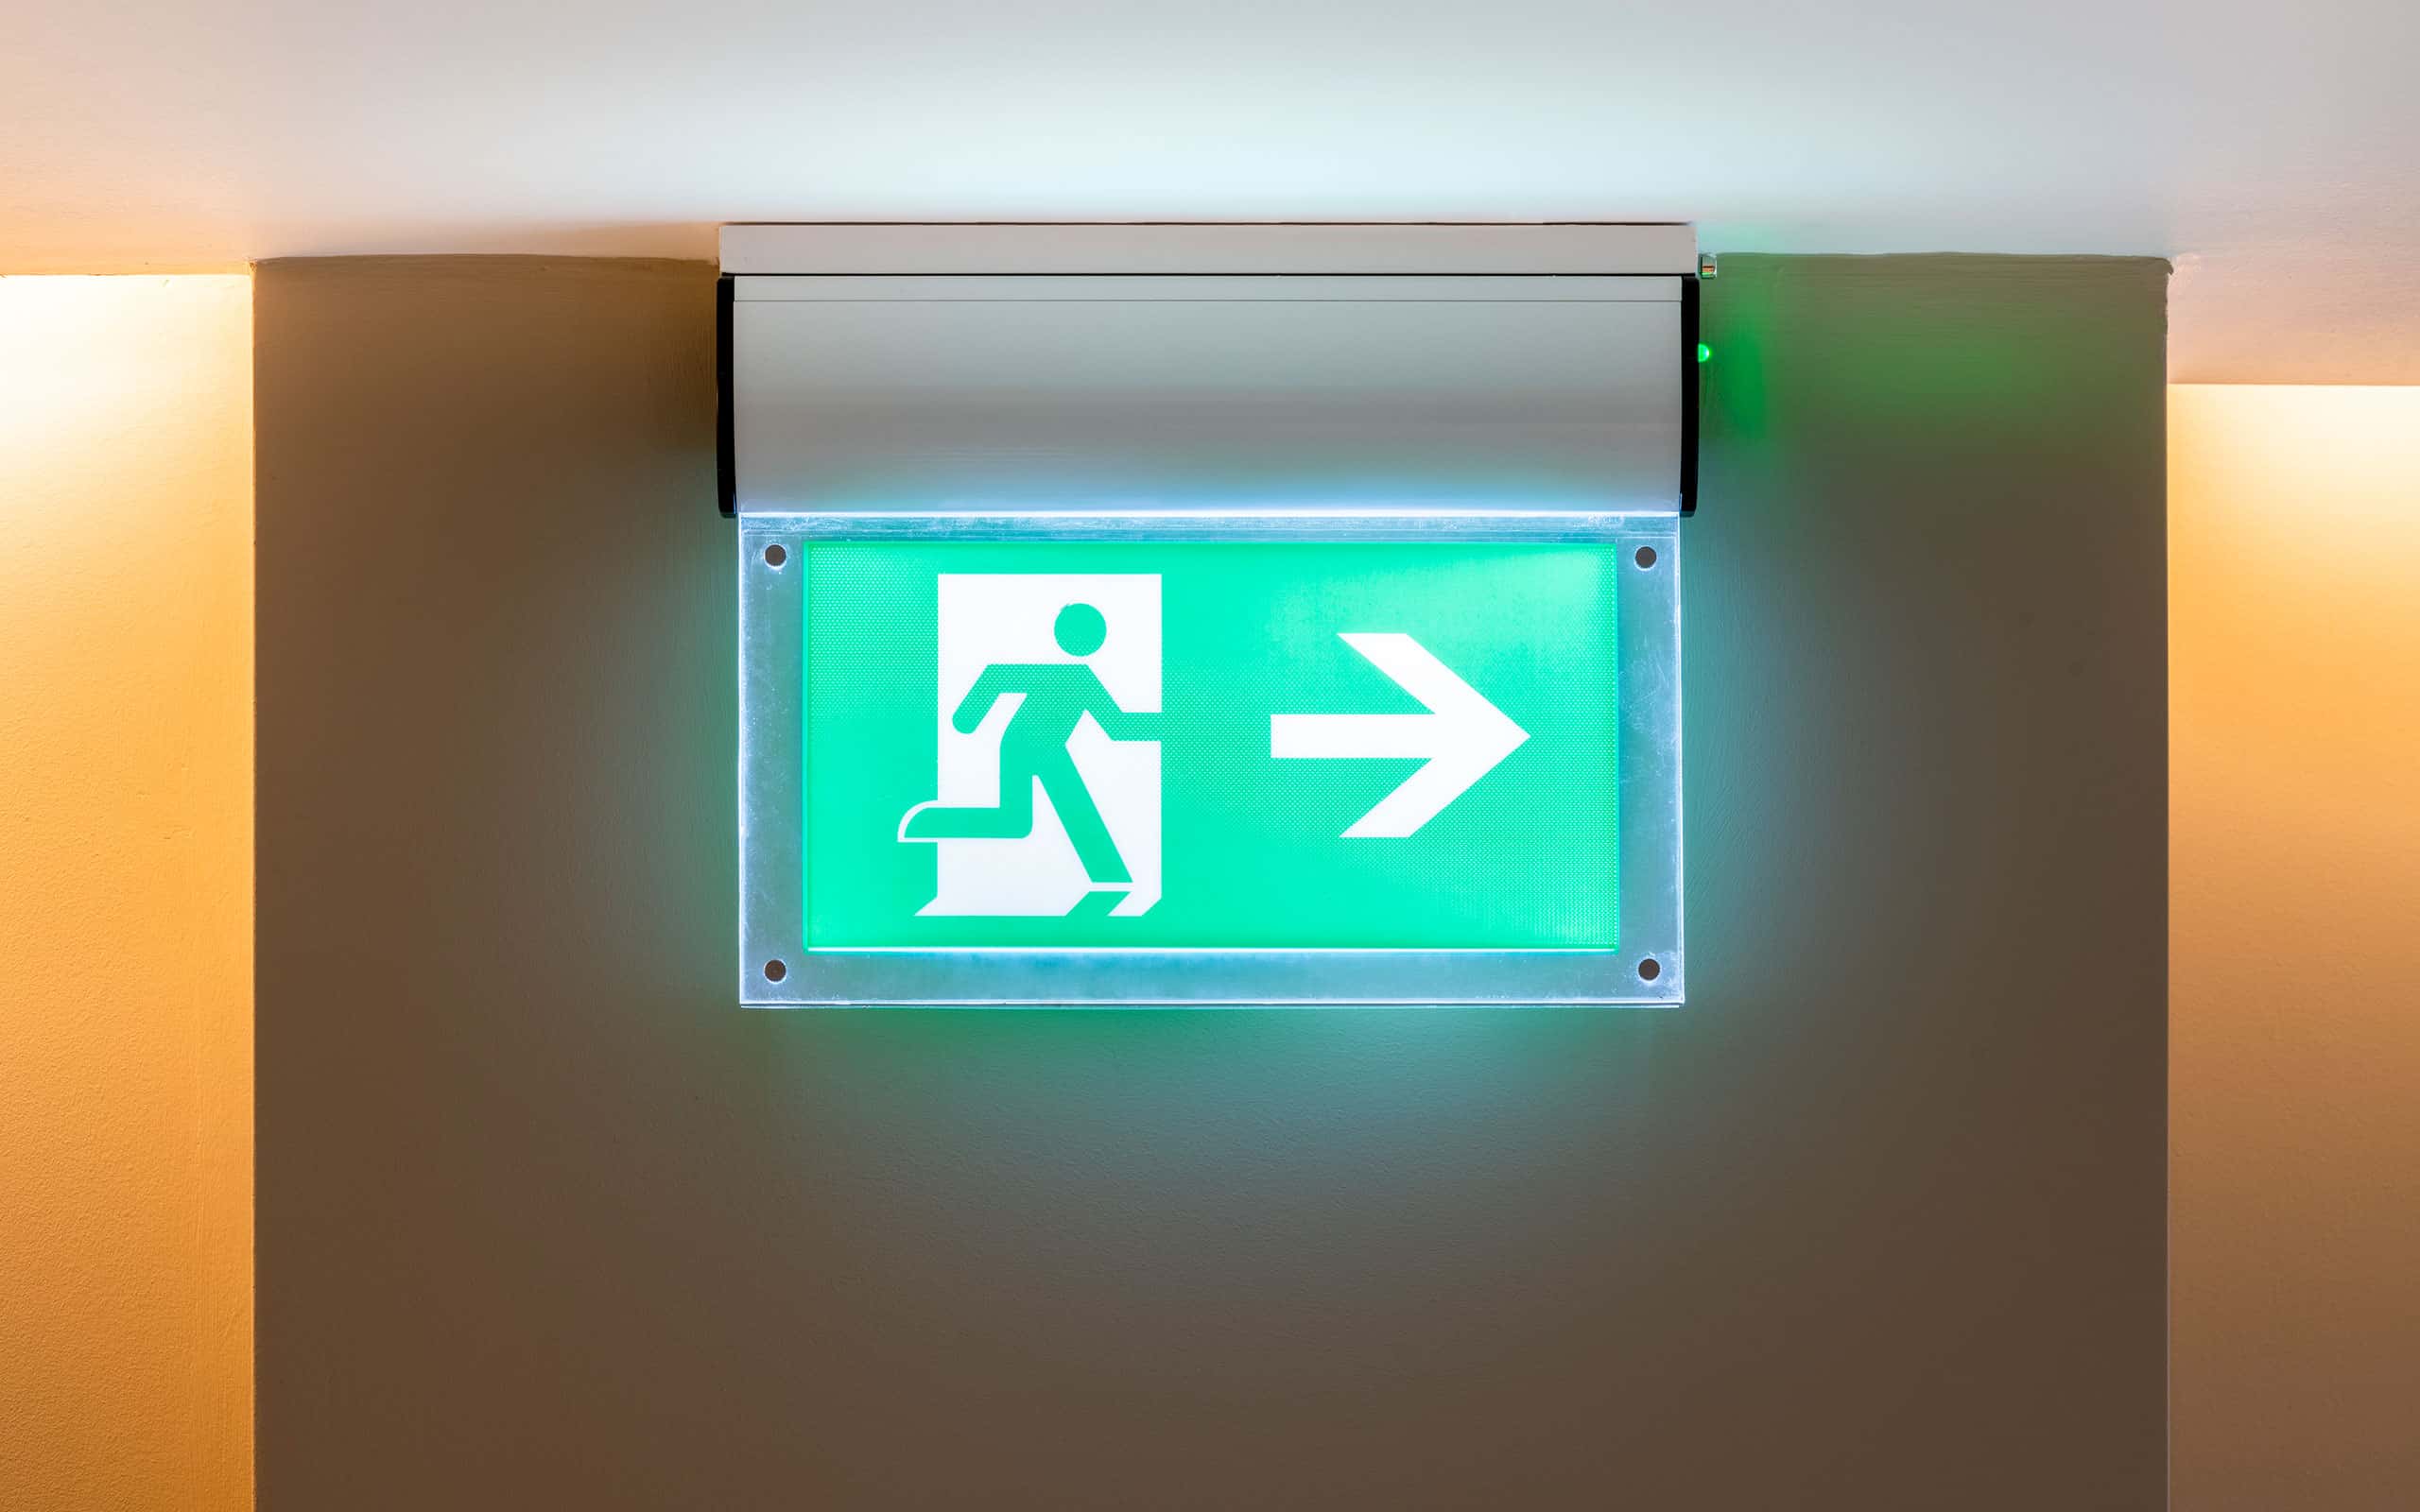 Razor Emergency Exit LED Lights In An Office